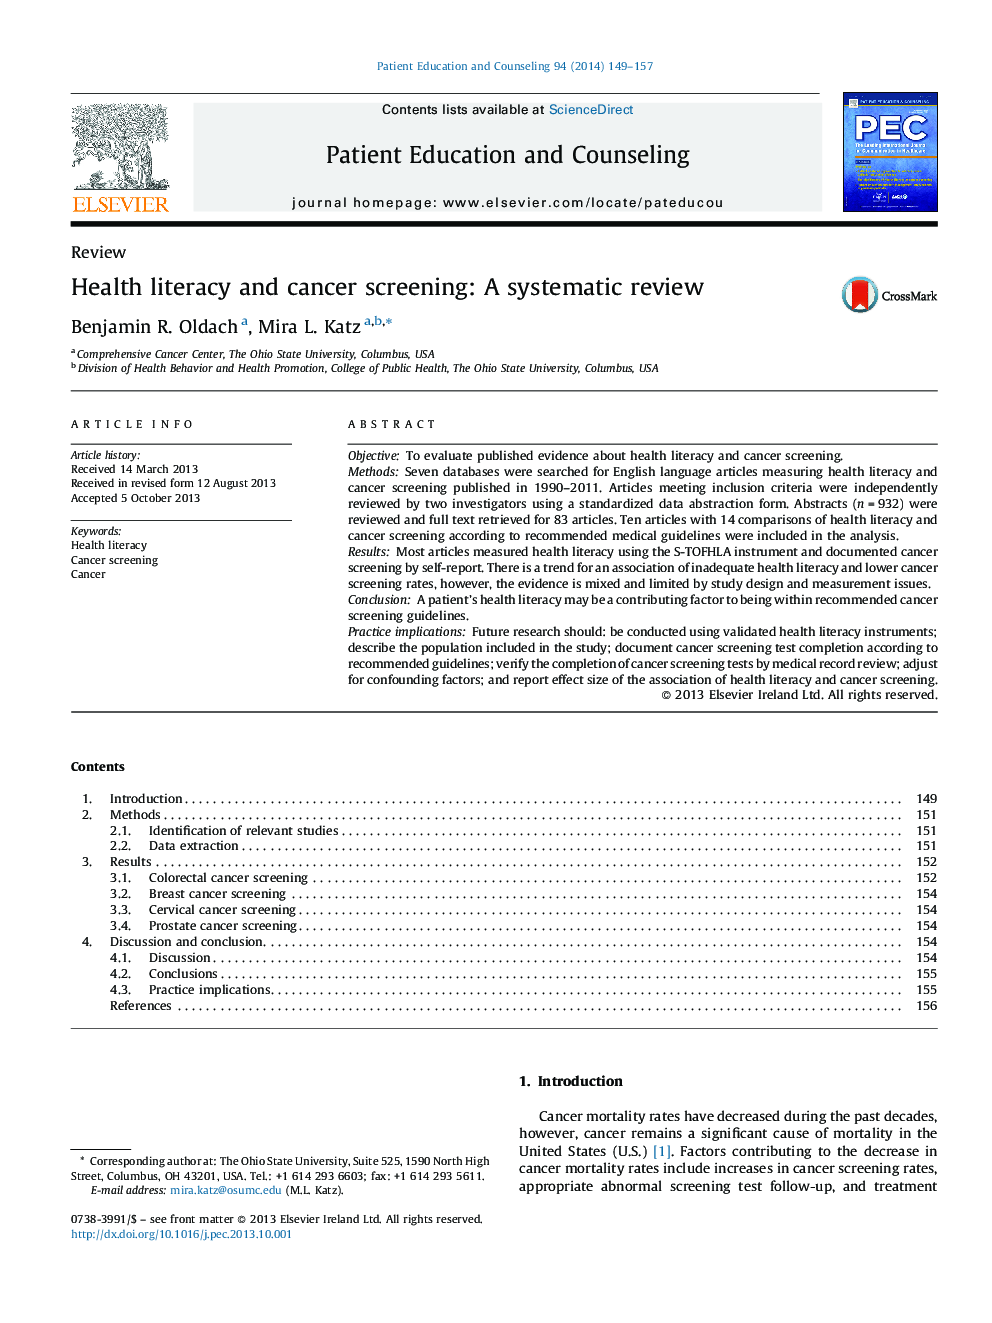 Health literacy and cancer screening: A systematic review